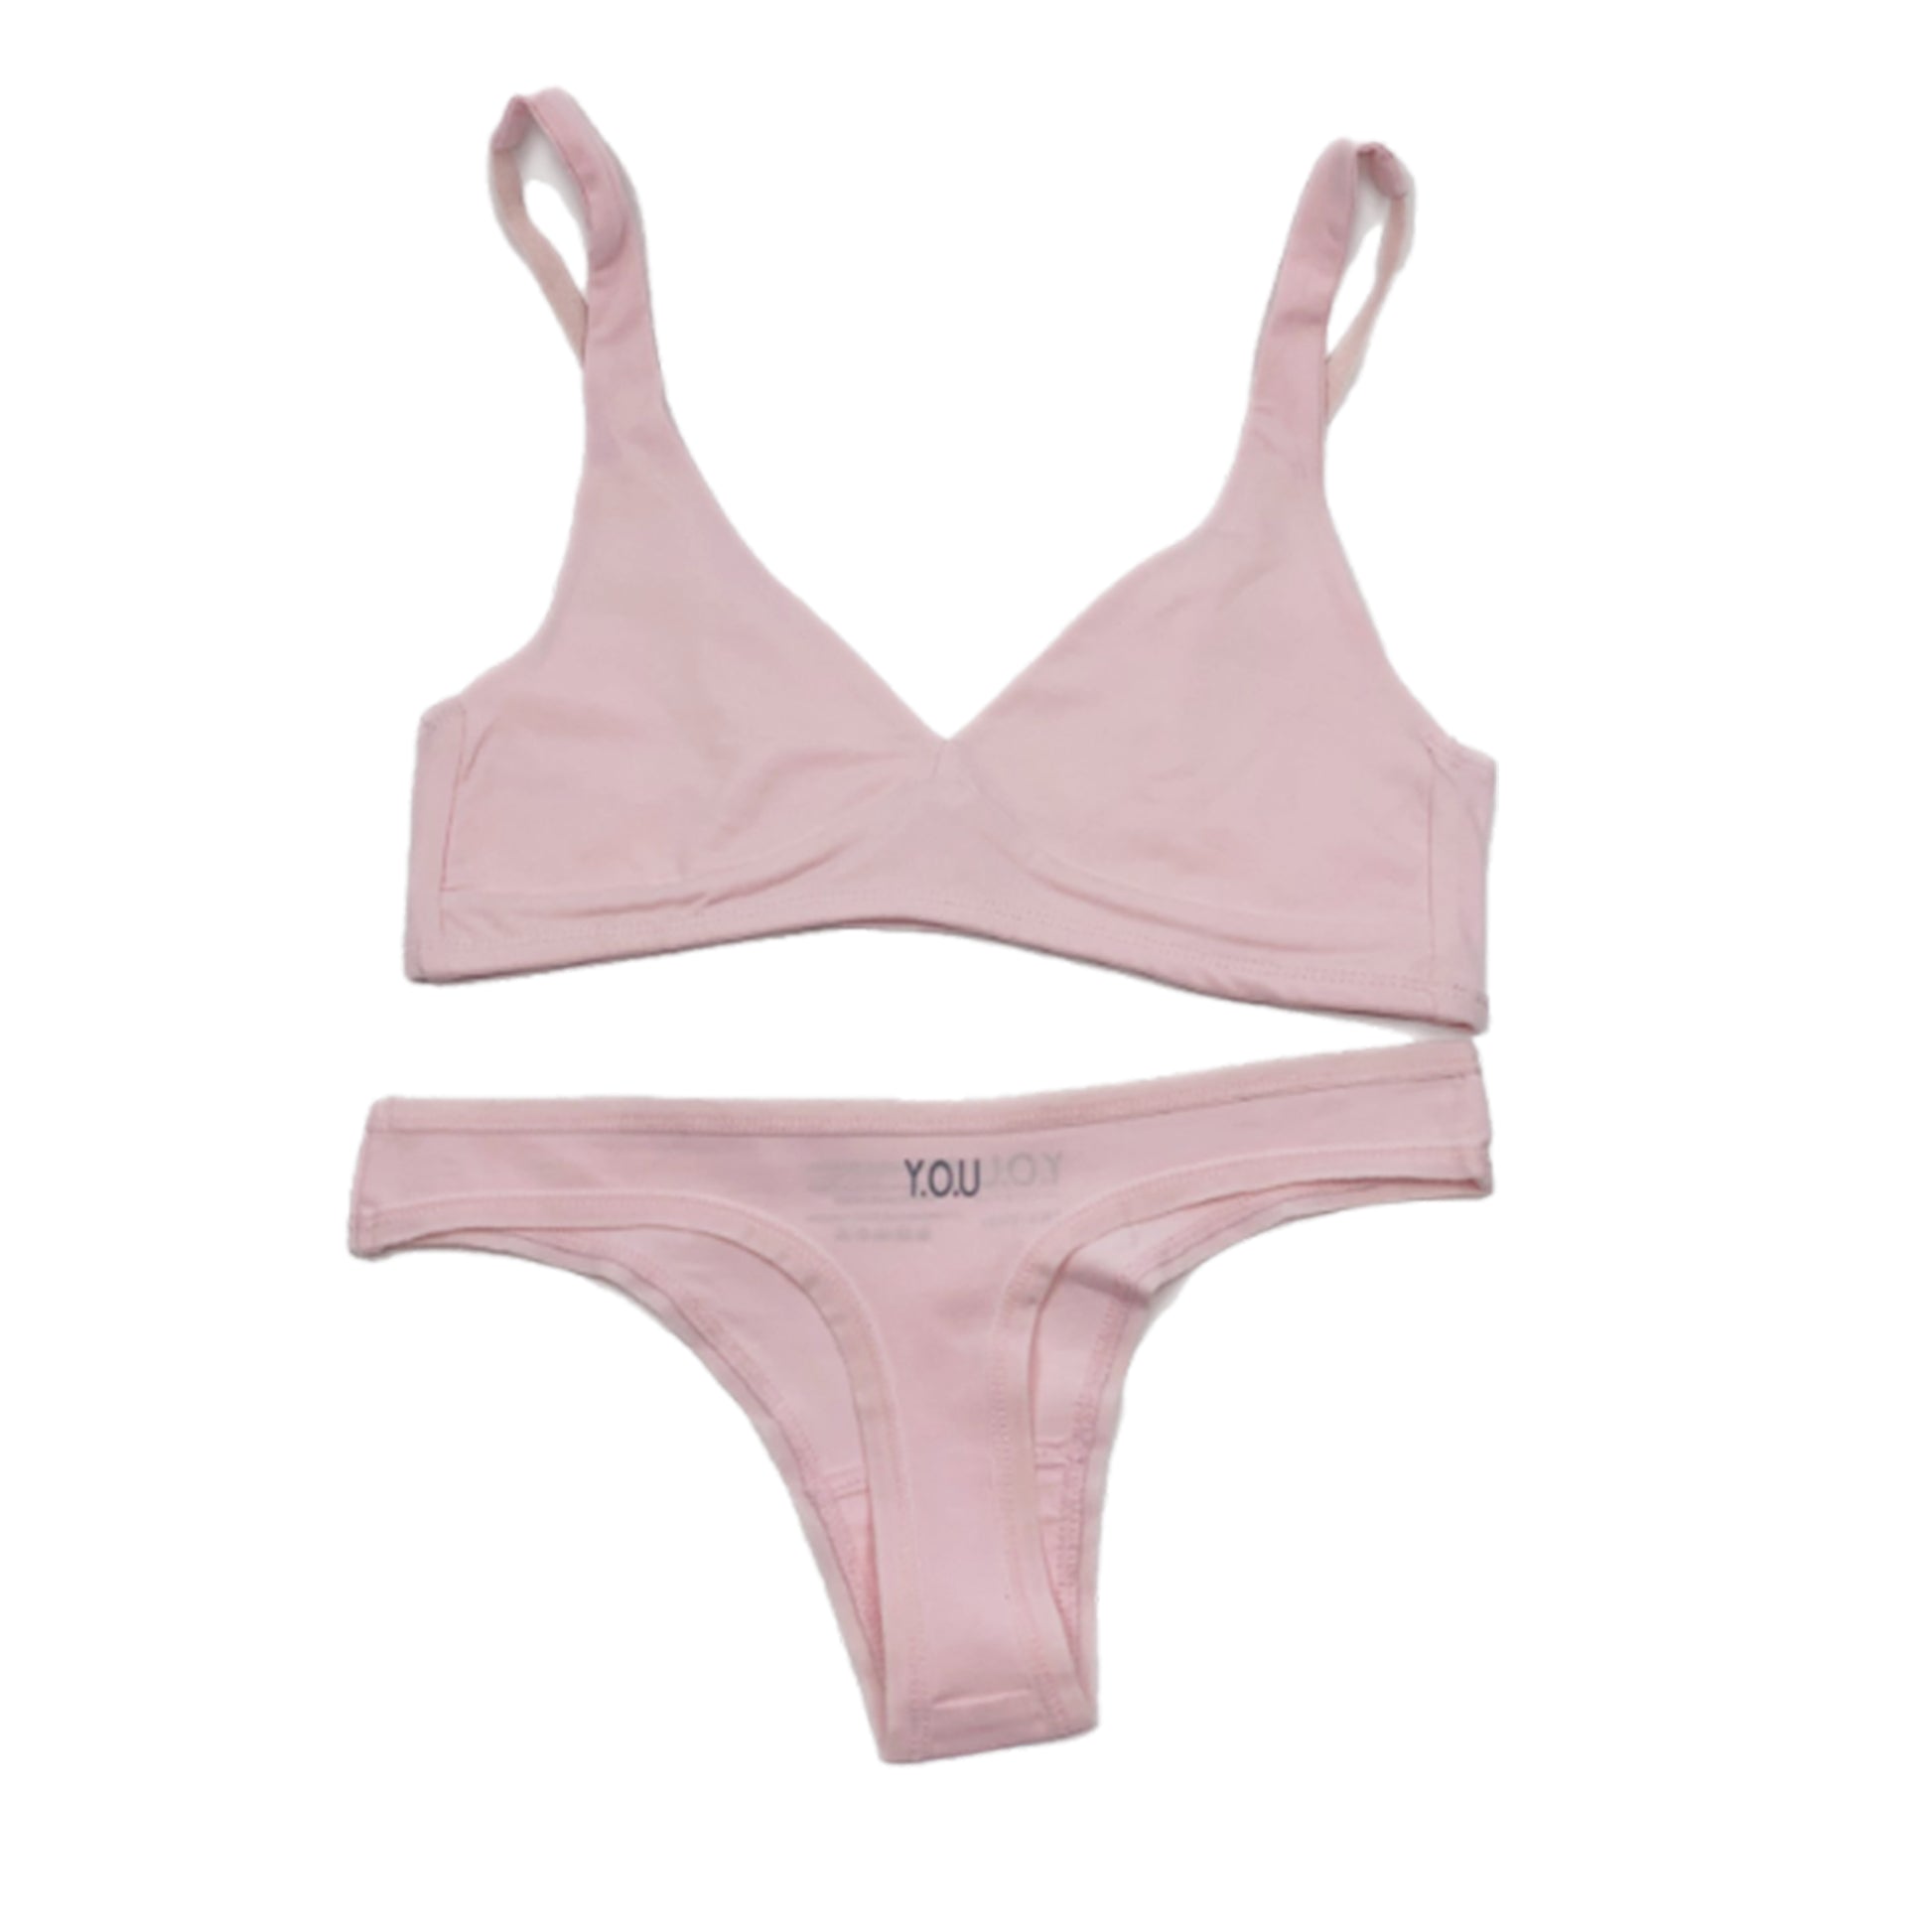 Women's organic cotton matching bralette and thong set in light